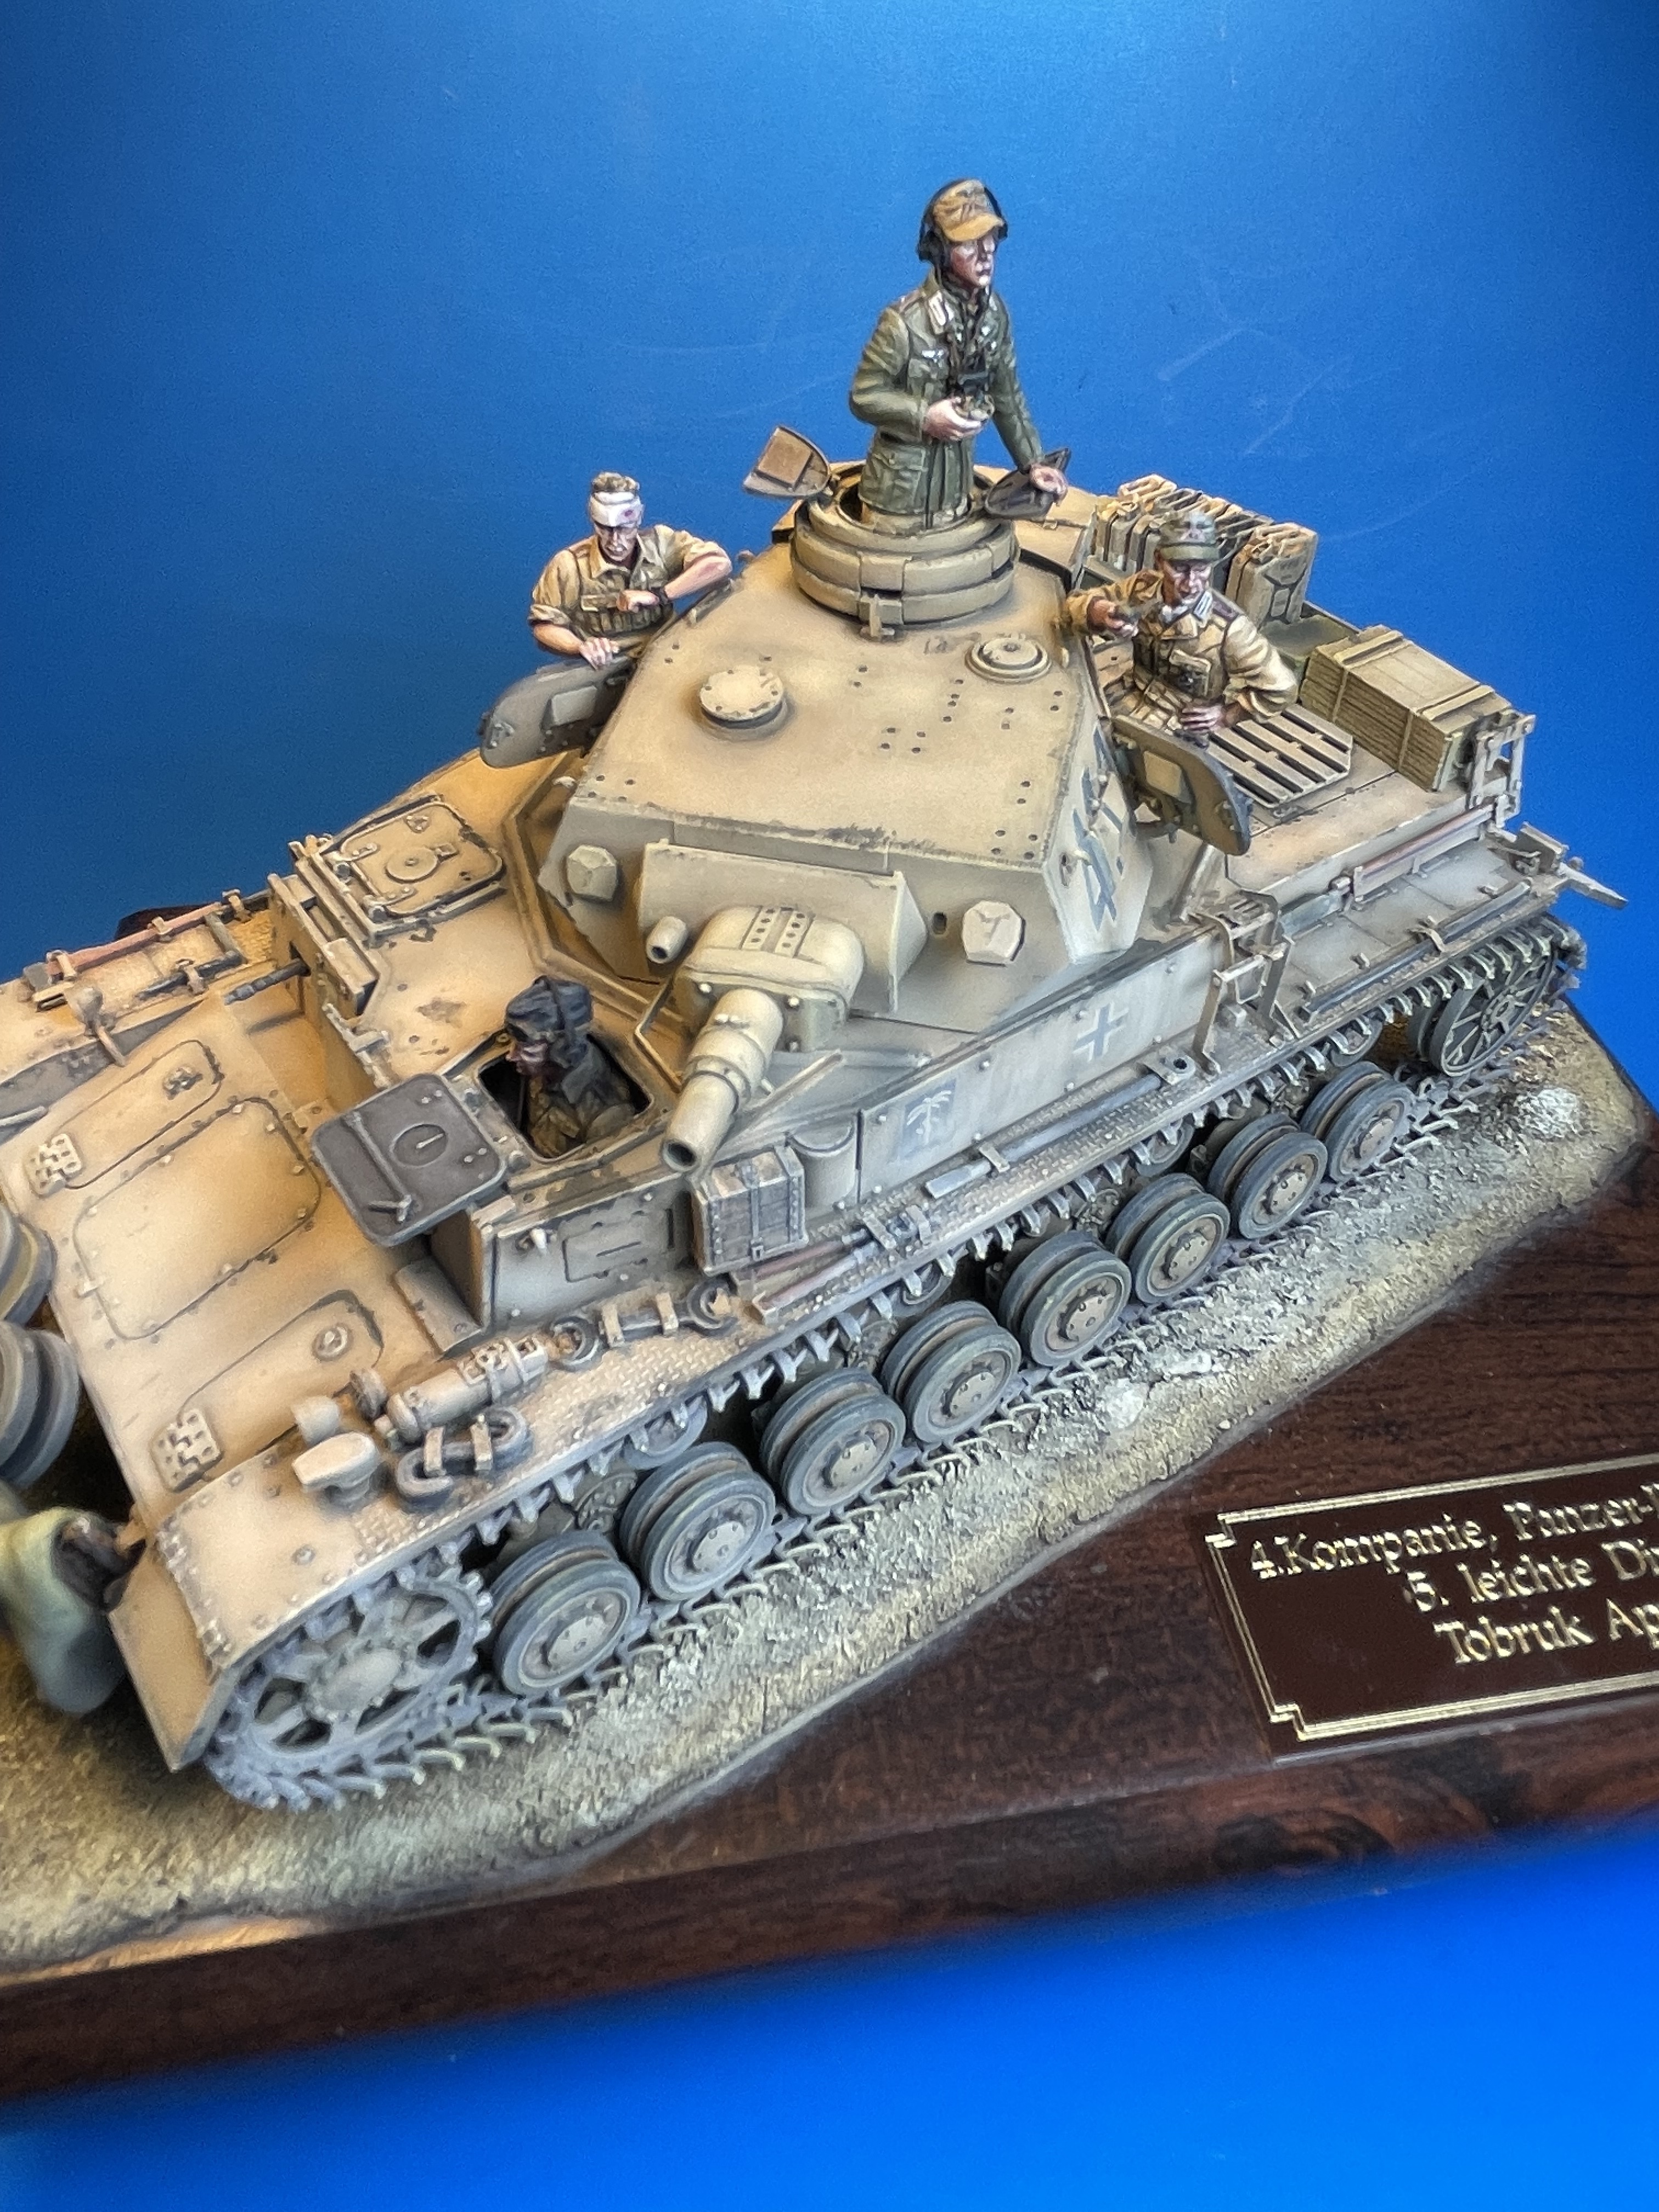 1/35 Panzer IV D, definitely not my best work, but I'm playing